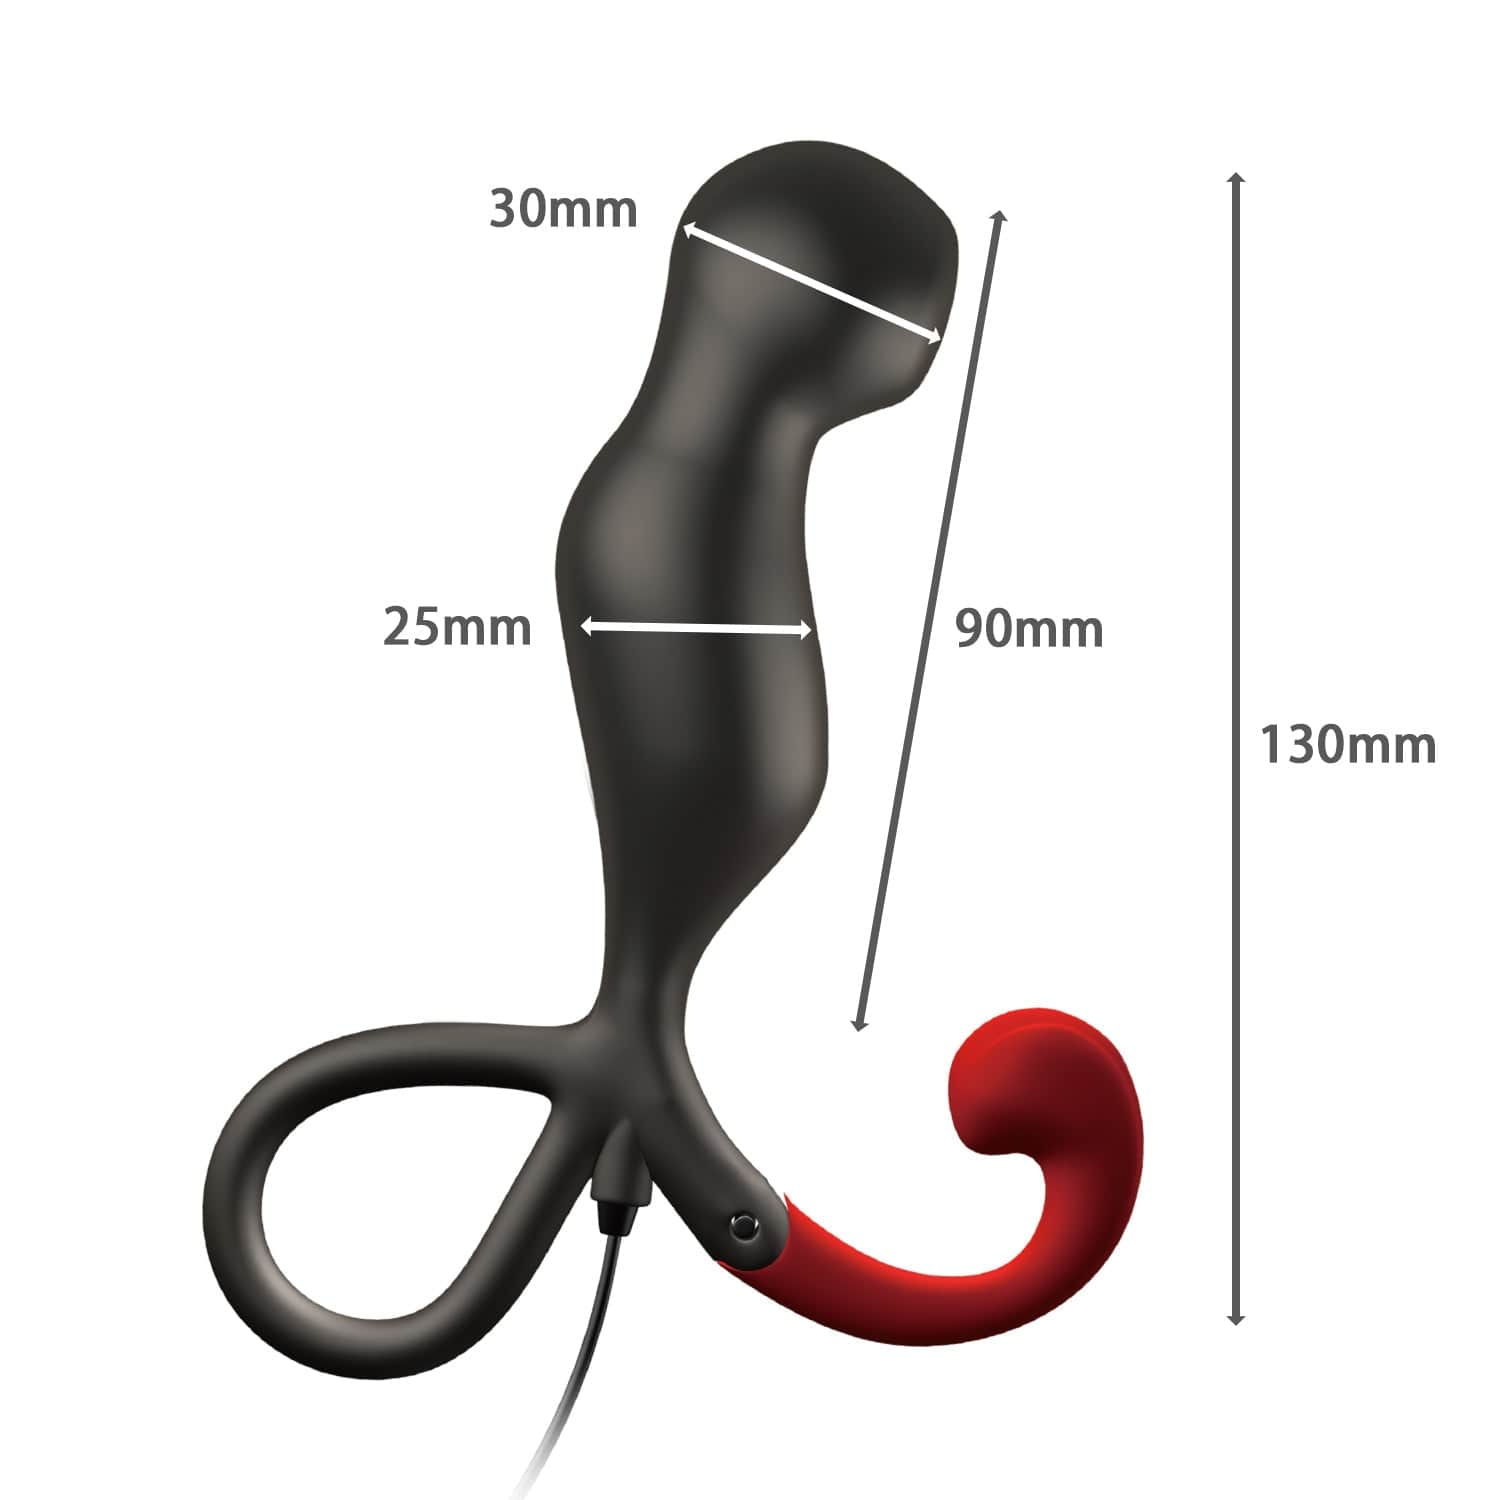 Wild One - Enemable R Type 4 Remote Control Prostate Massager (Black) Prostate Massager (Vibration) Non Rechargeable 626137133 CherryAffairs